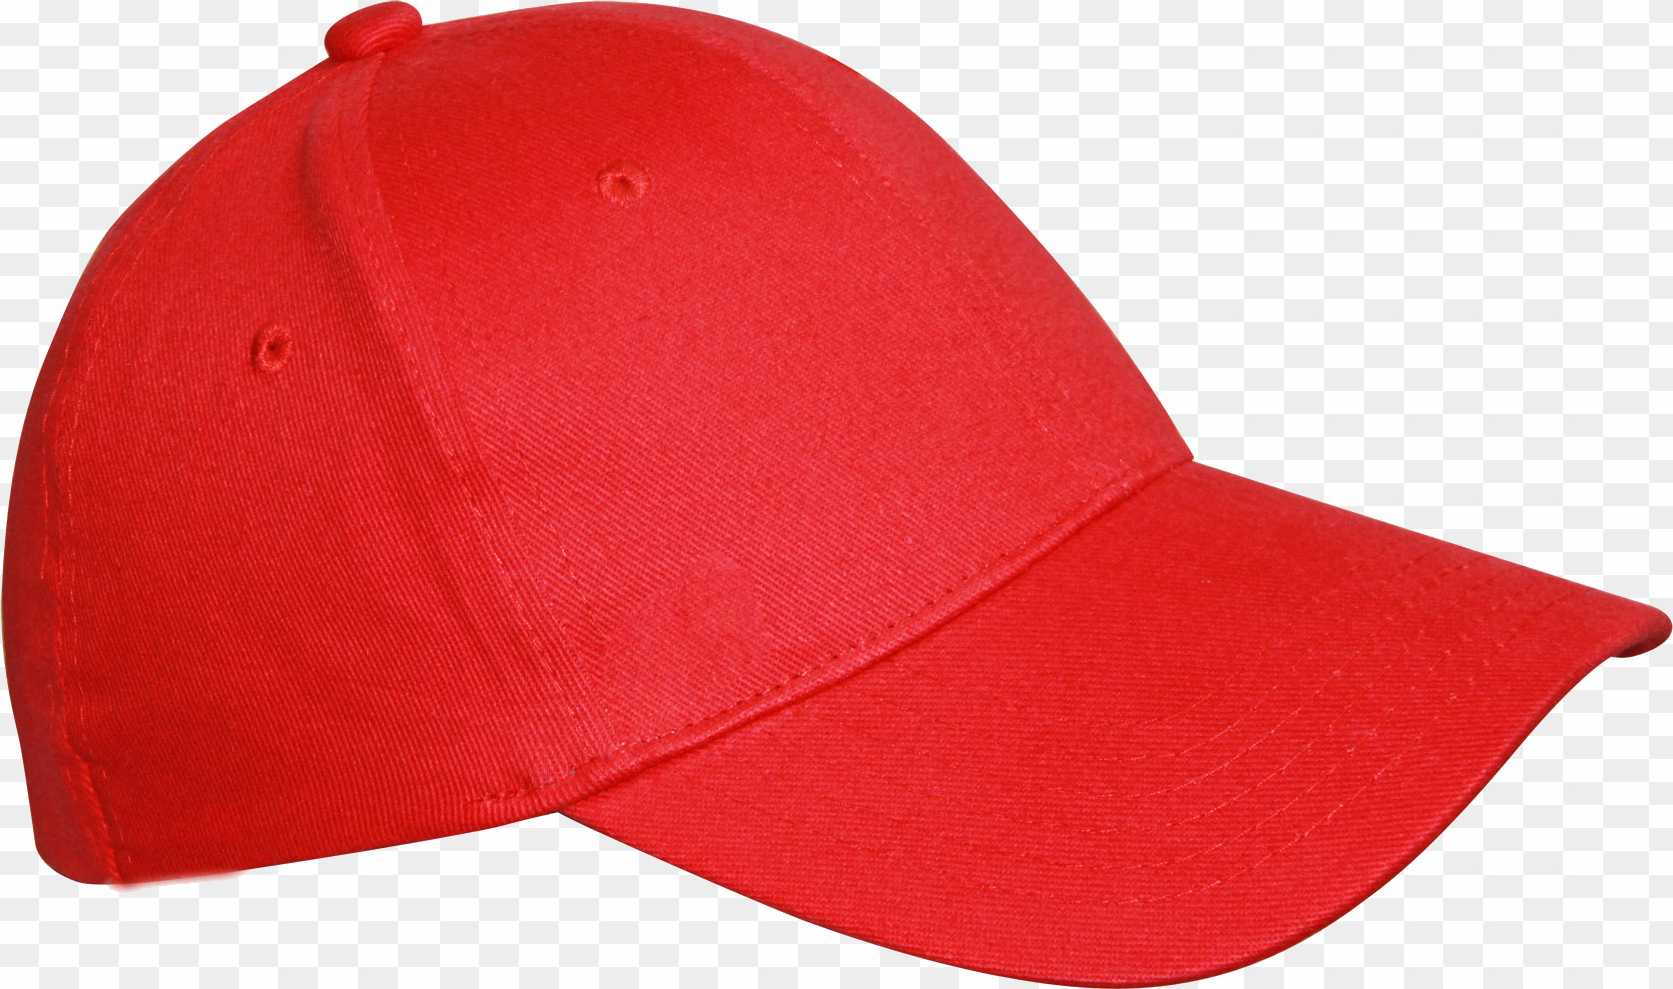 Red cap png images